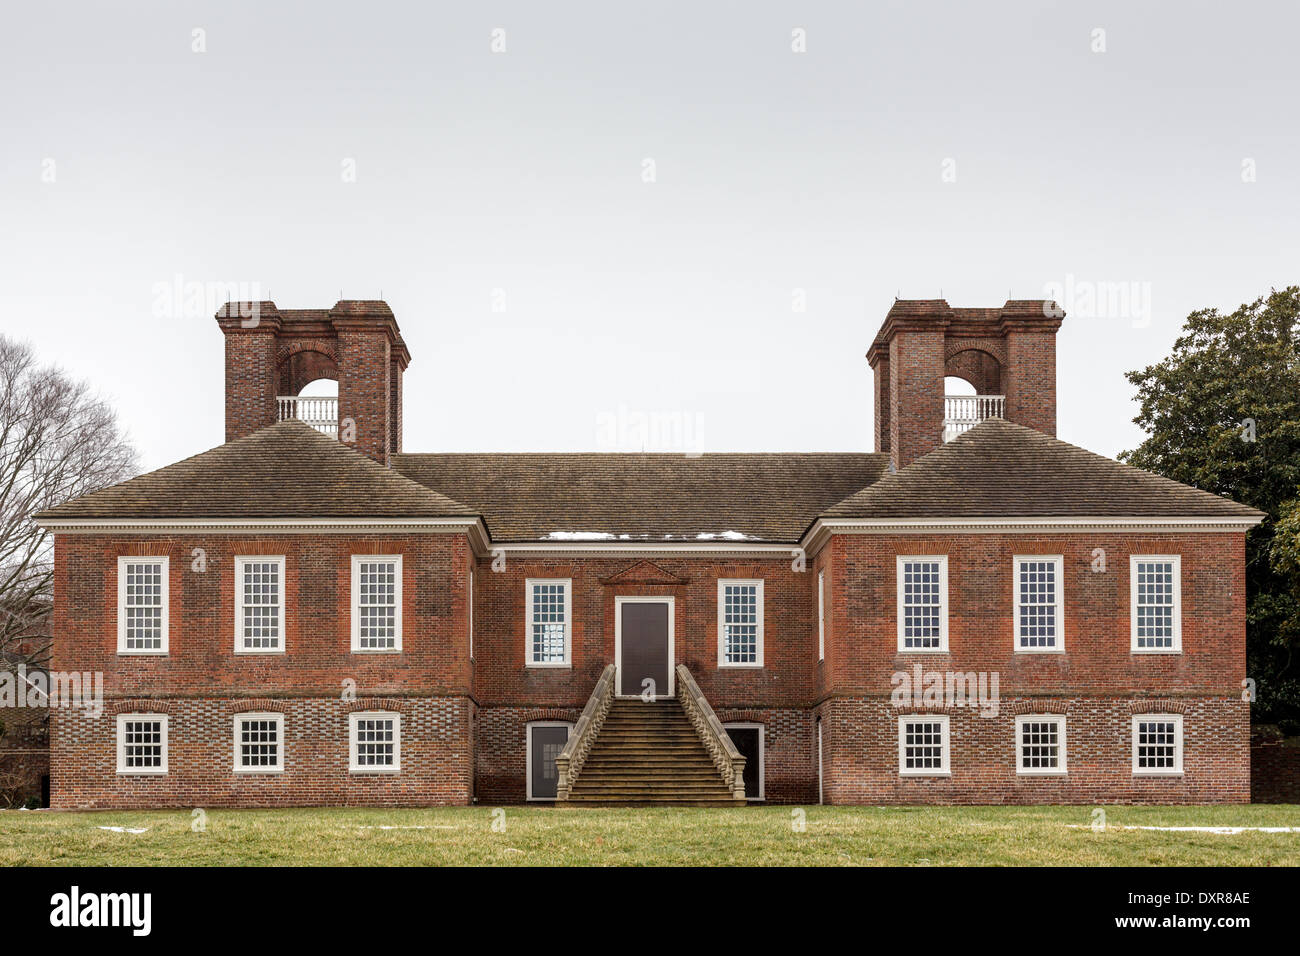 Great House, Stratford Hall plantation, birthplace of Robert E. Lee, Northern Neck, Virginia. Stock Photo